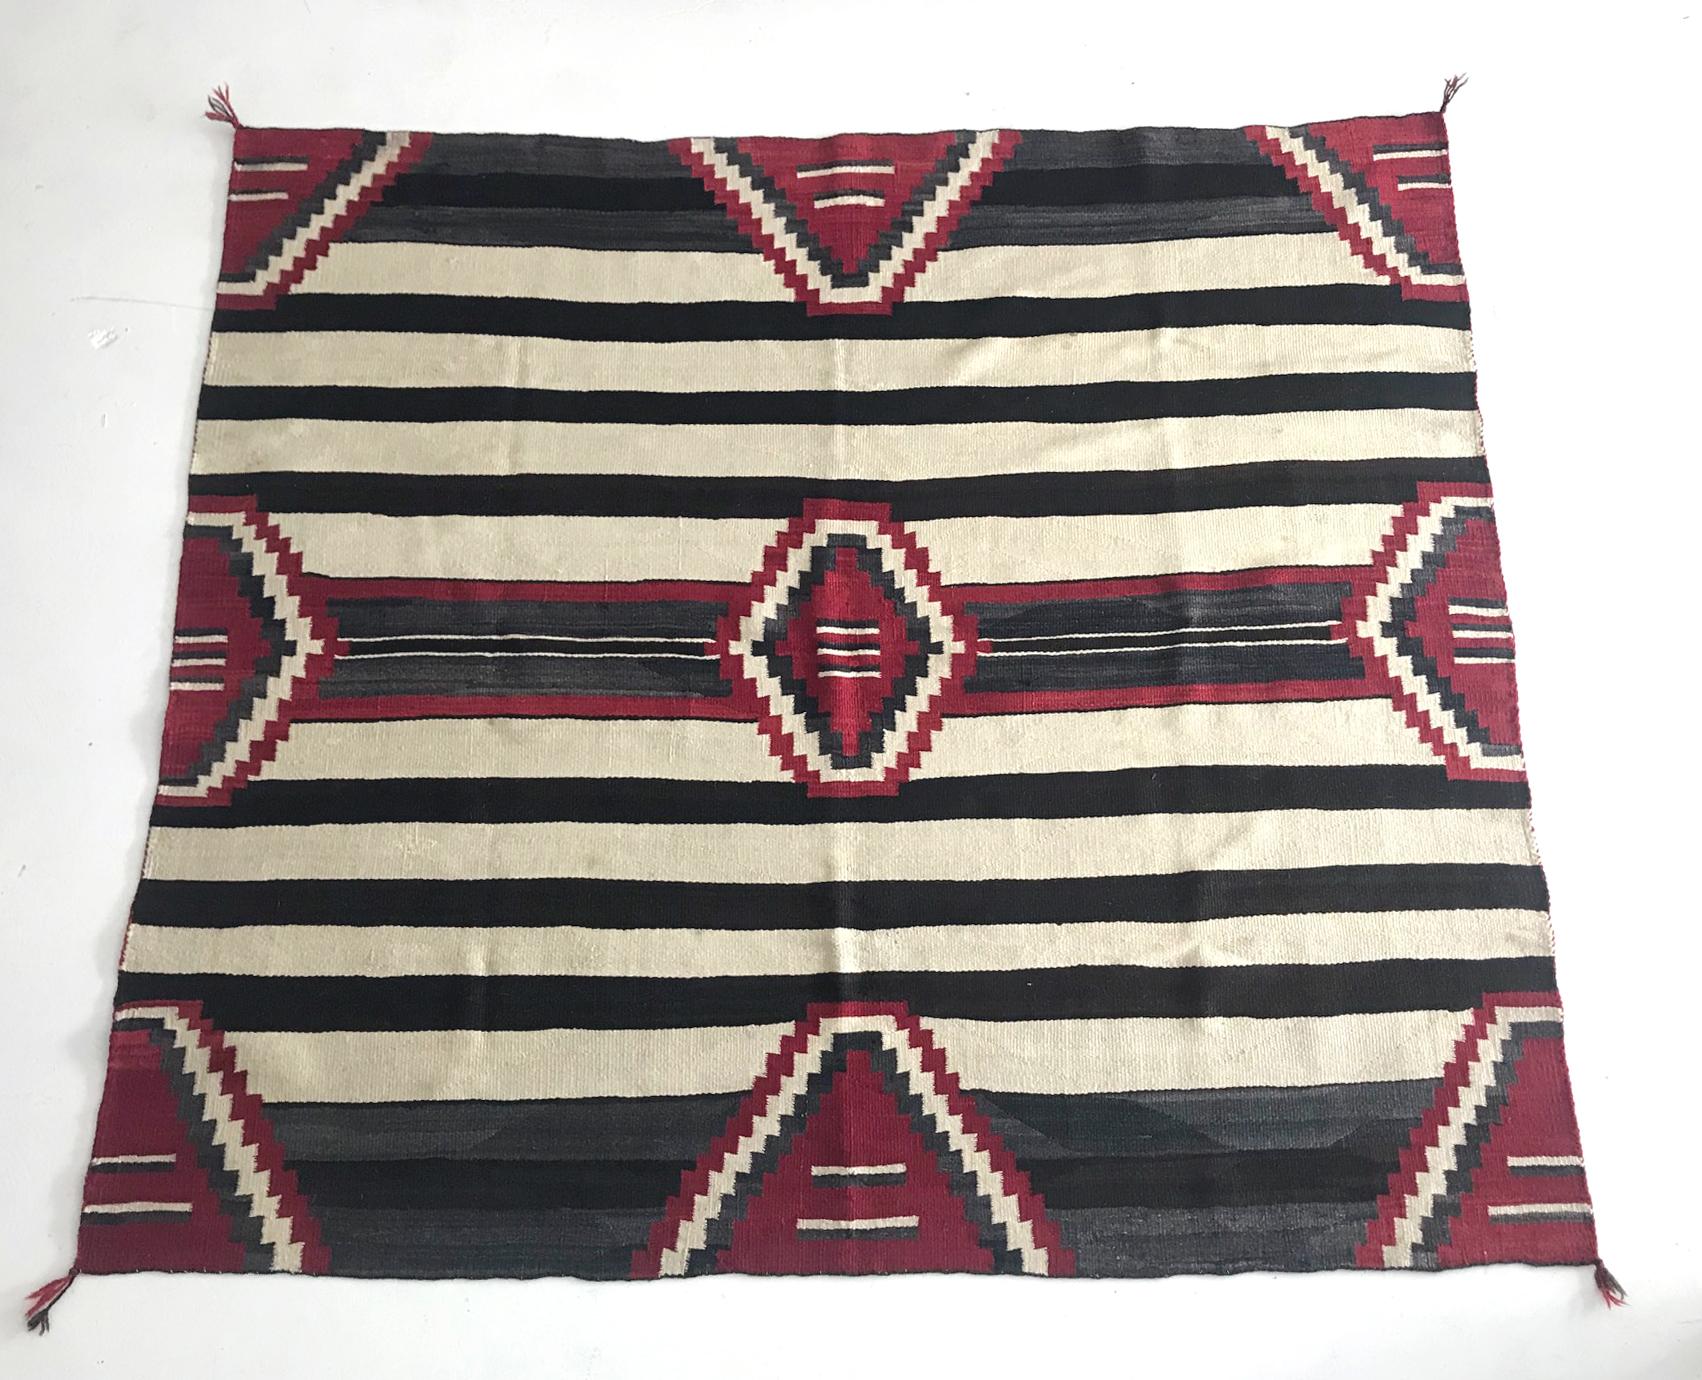 On offer is a Navajo chief blanket of the third phase circa 1895-1920s. The chief blanket is the highest achievement of the Navajo textile development, and this is a wonderful example of the high quality. Woven from off white, brown handspun sheep